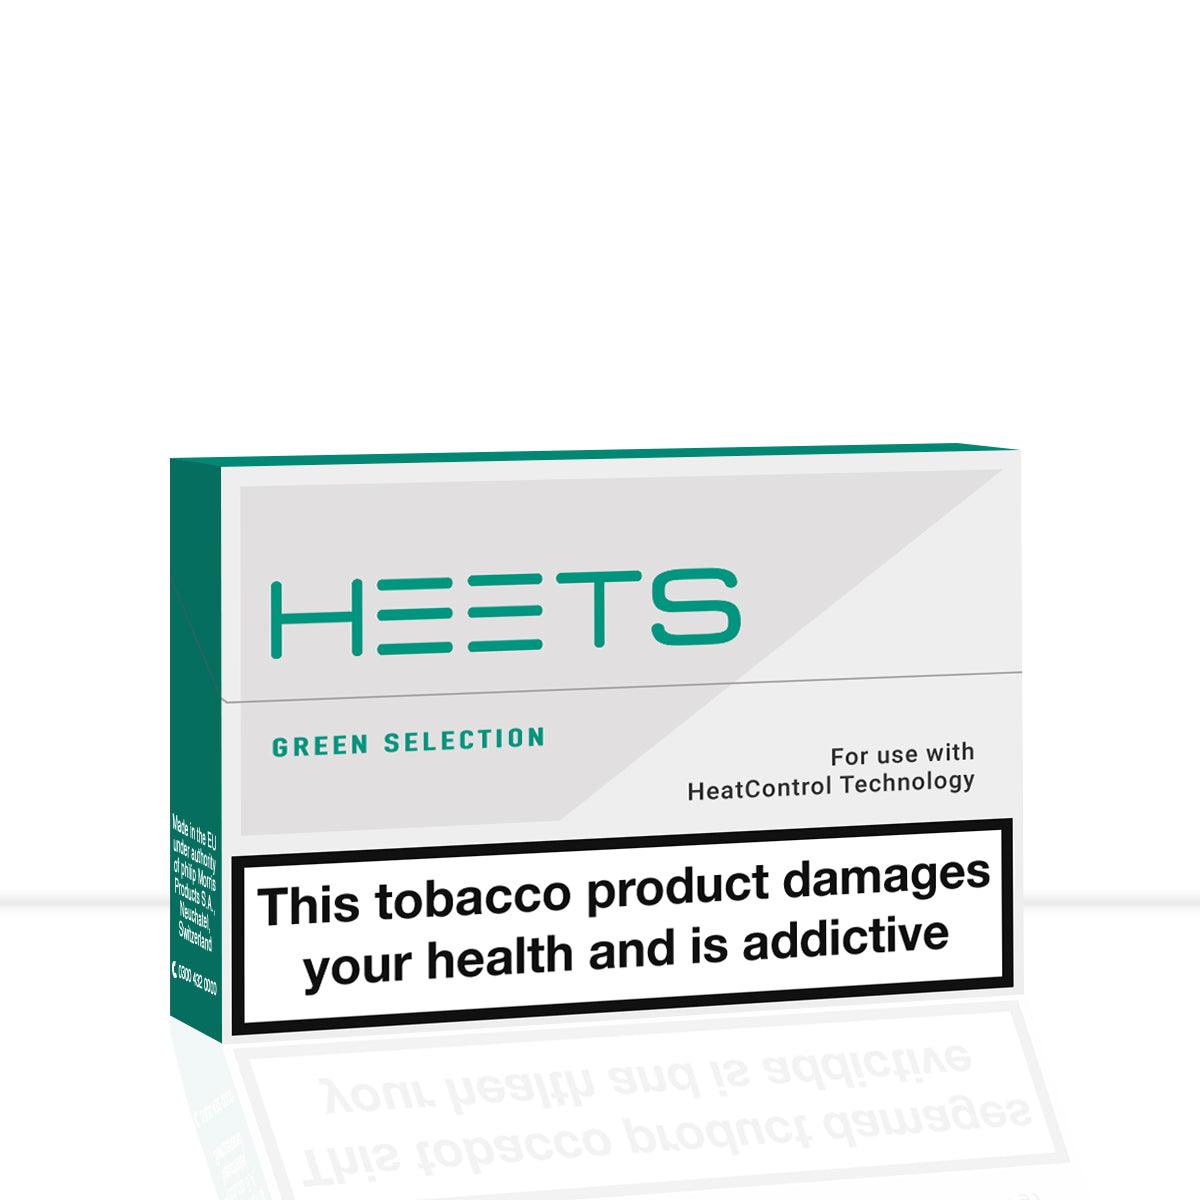 Green Heets IQOS - Green Heets IQOS - Heated Tobacco